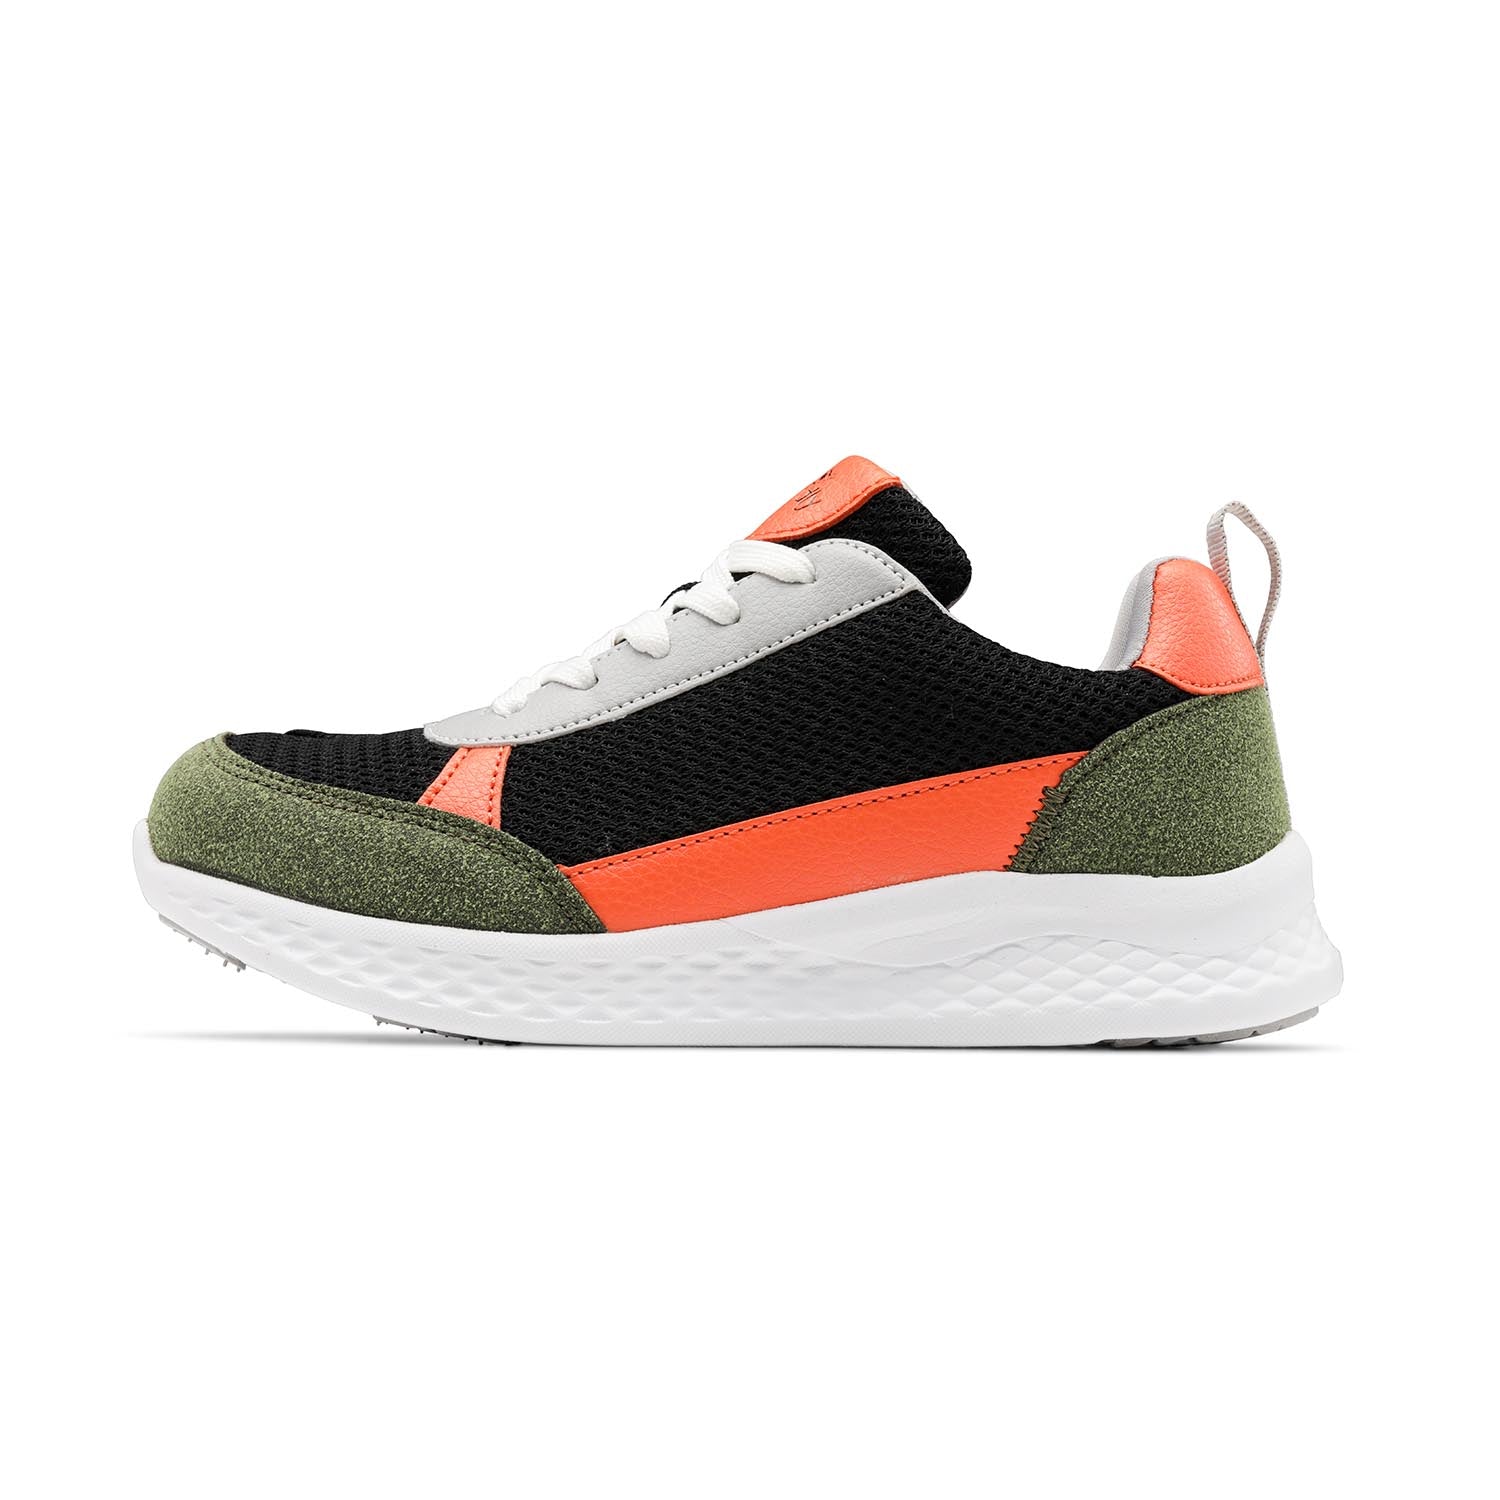 Orange, black and dark green kids shoe with white bottom and front zipper access.